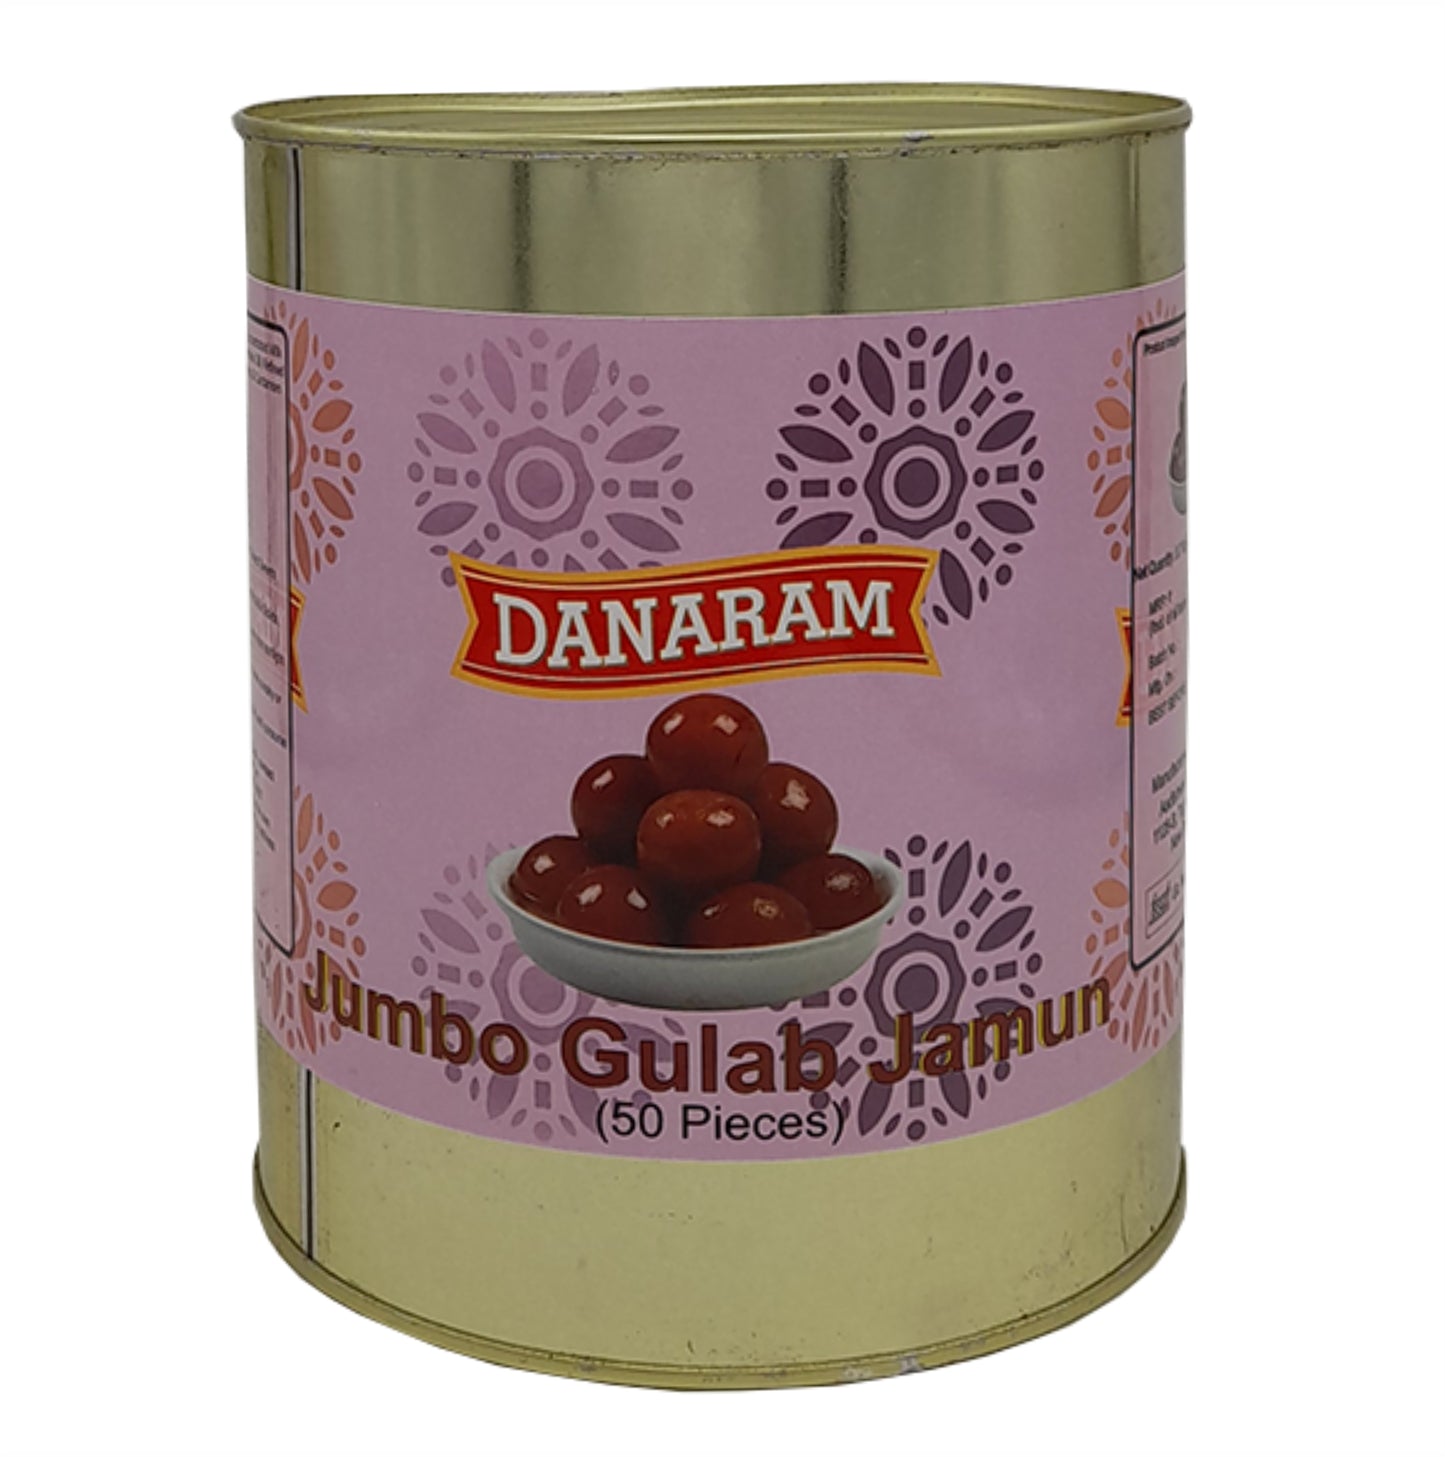 3.7 Kg Jumbo Gulab Jamun Can - Pack of 4 Cans